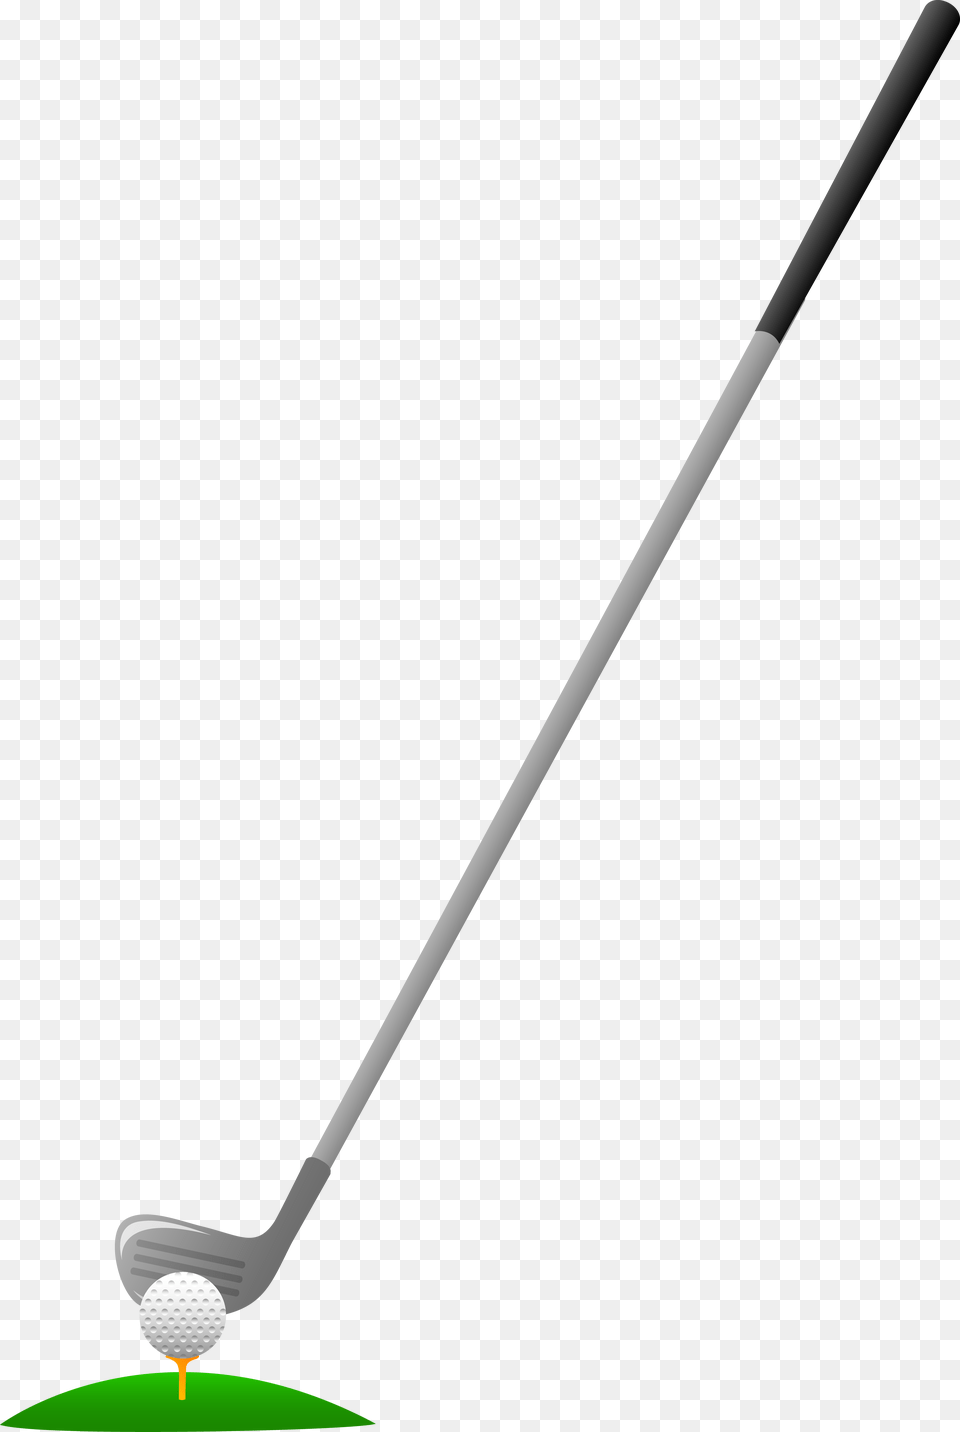 Golf Club And Ball On Tee Golf Club And Ball Clip Art, Triangle Free Png Download